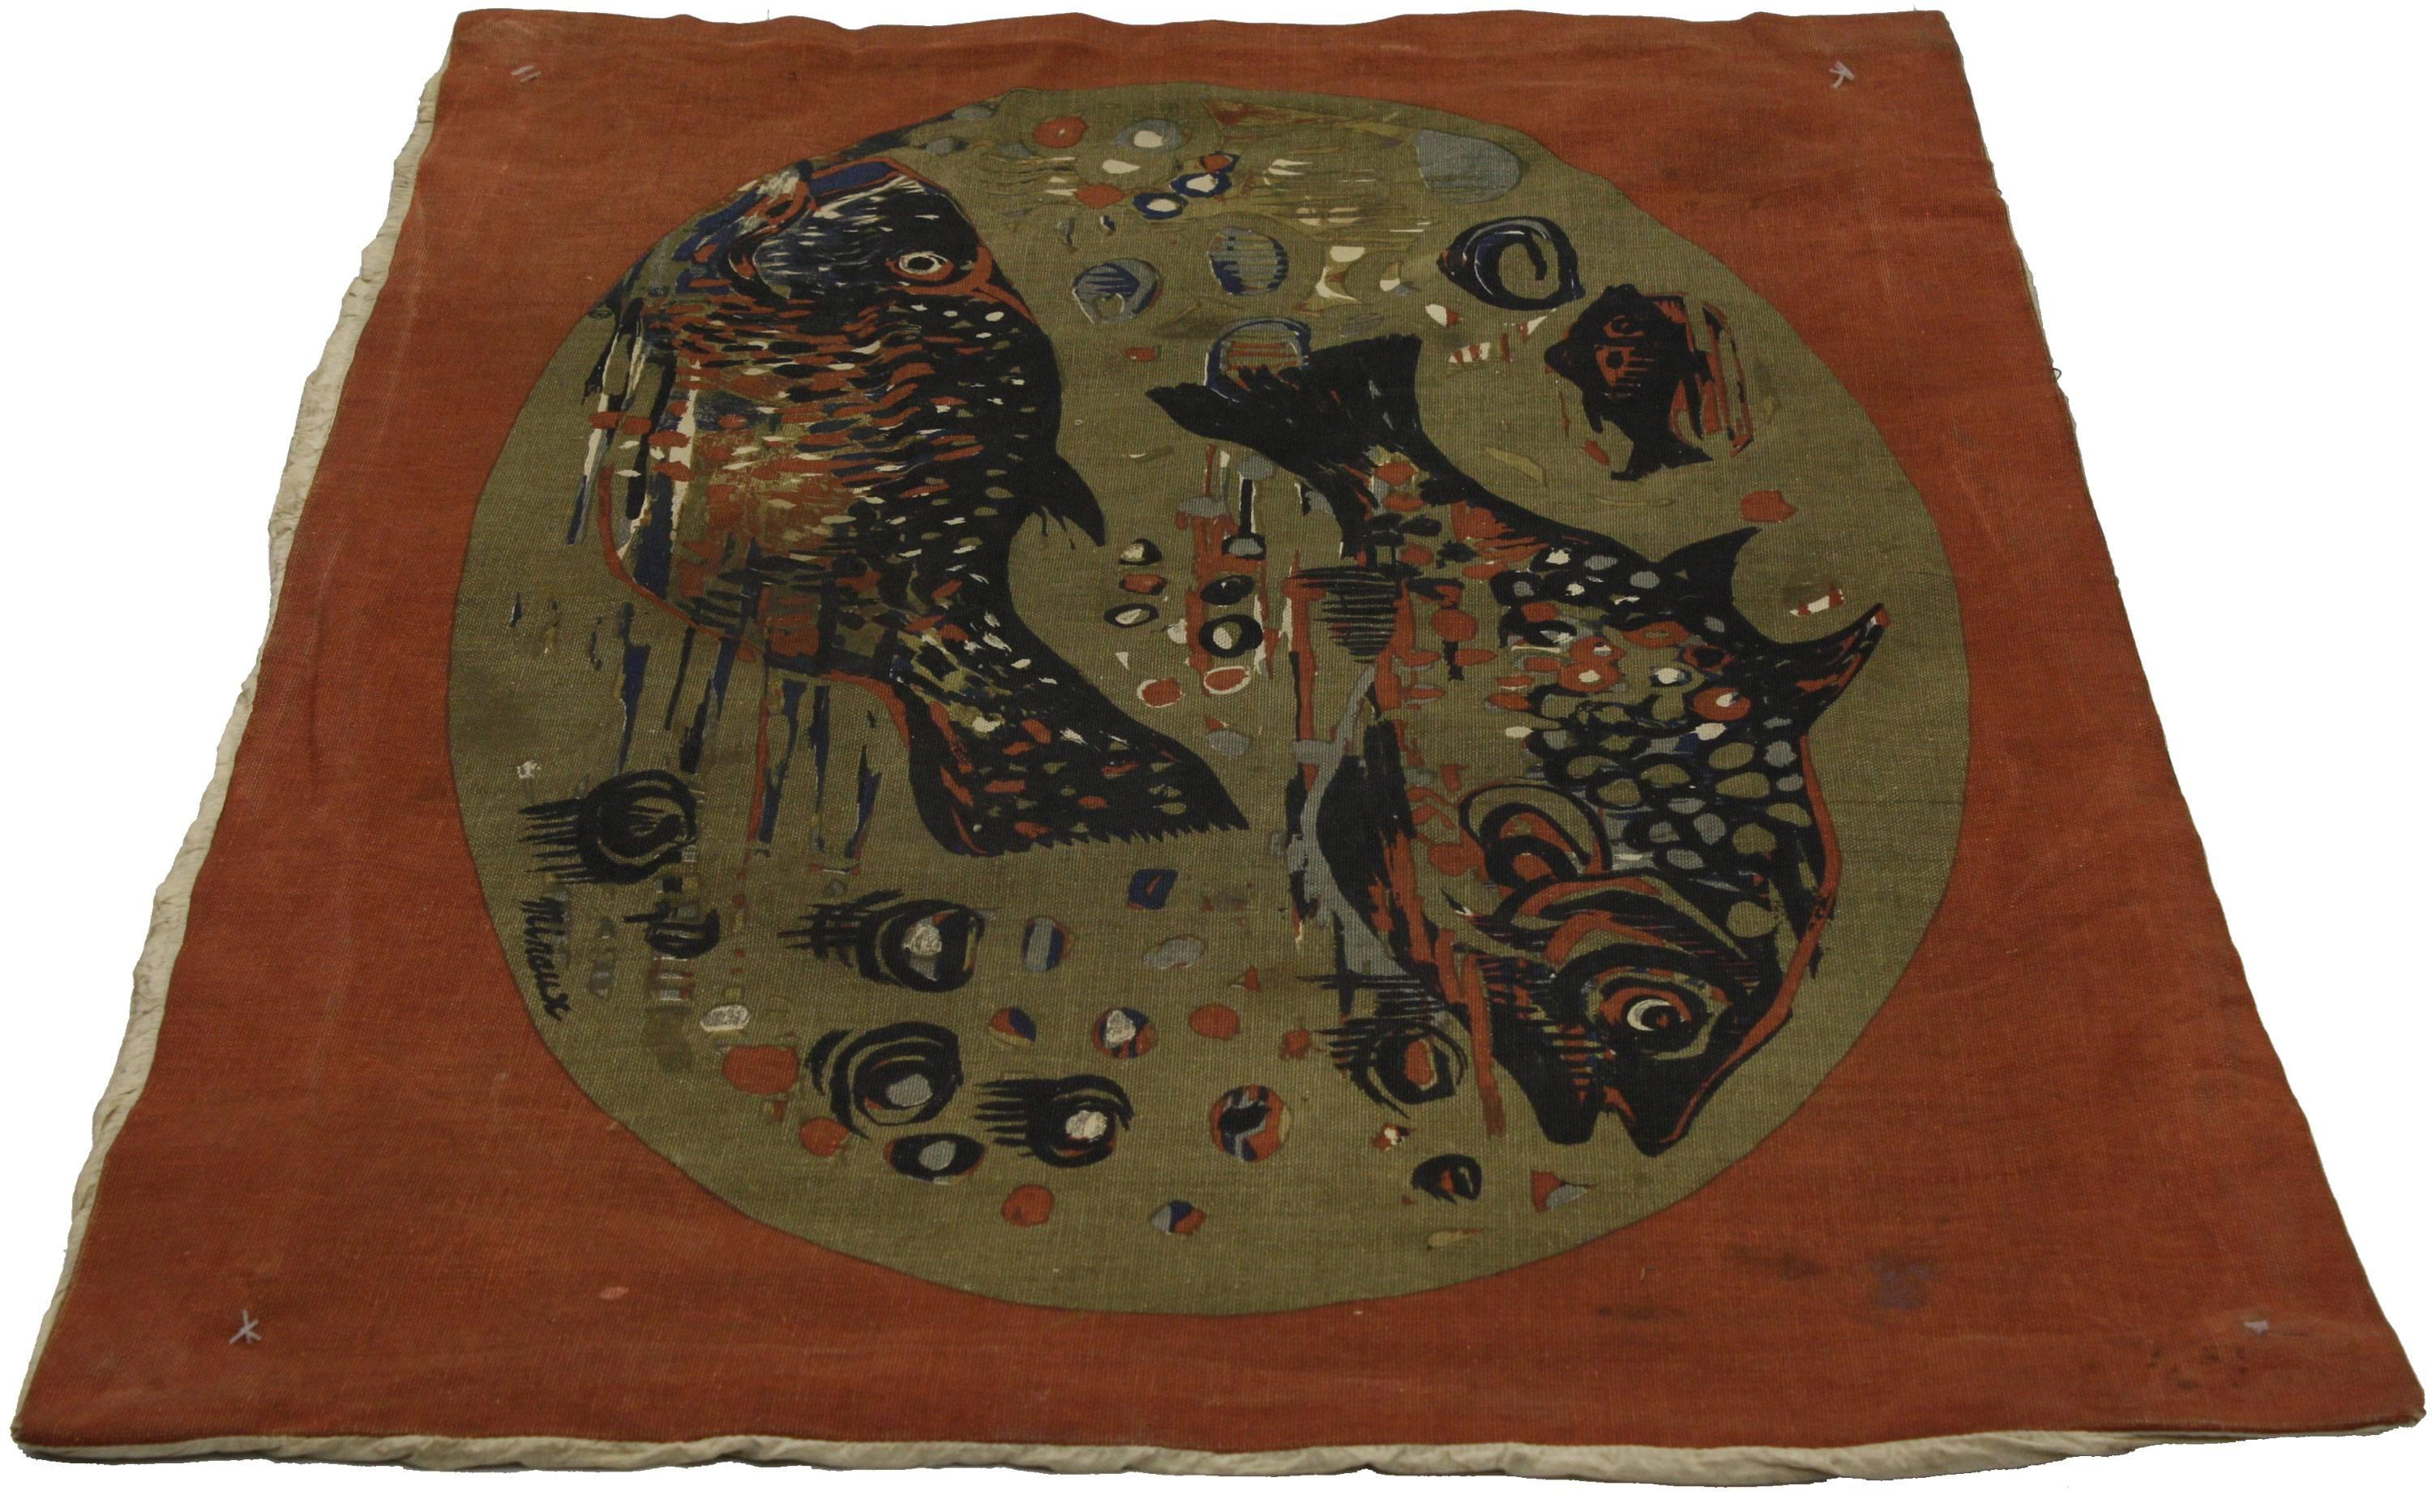 71623, Mid-Century Modern wall hanging of fishes by André Minaux. This Mid-Century Modern tapestry depicts two large fish and one small fish swimming surrounded by a burnt orange border. Rendered in variegated shades of burnt orange, ink blue, navy